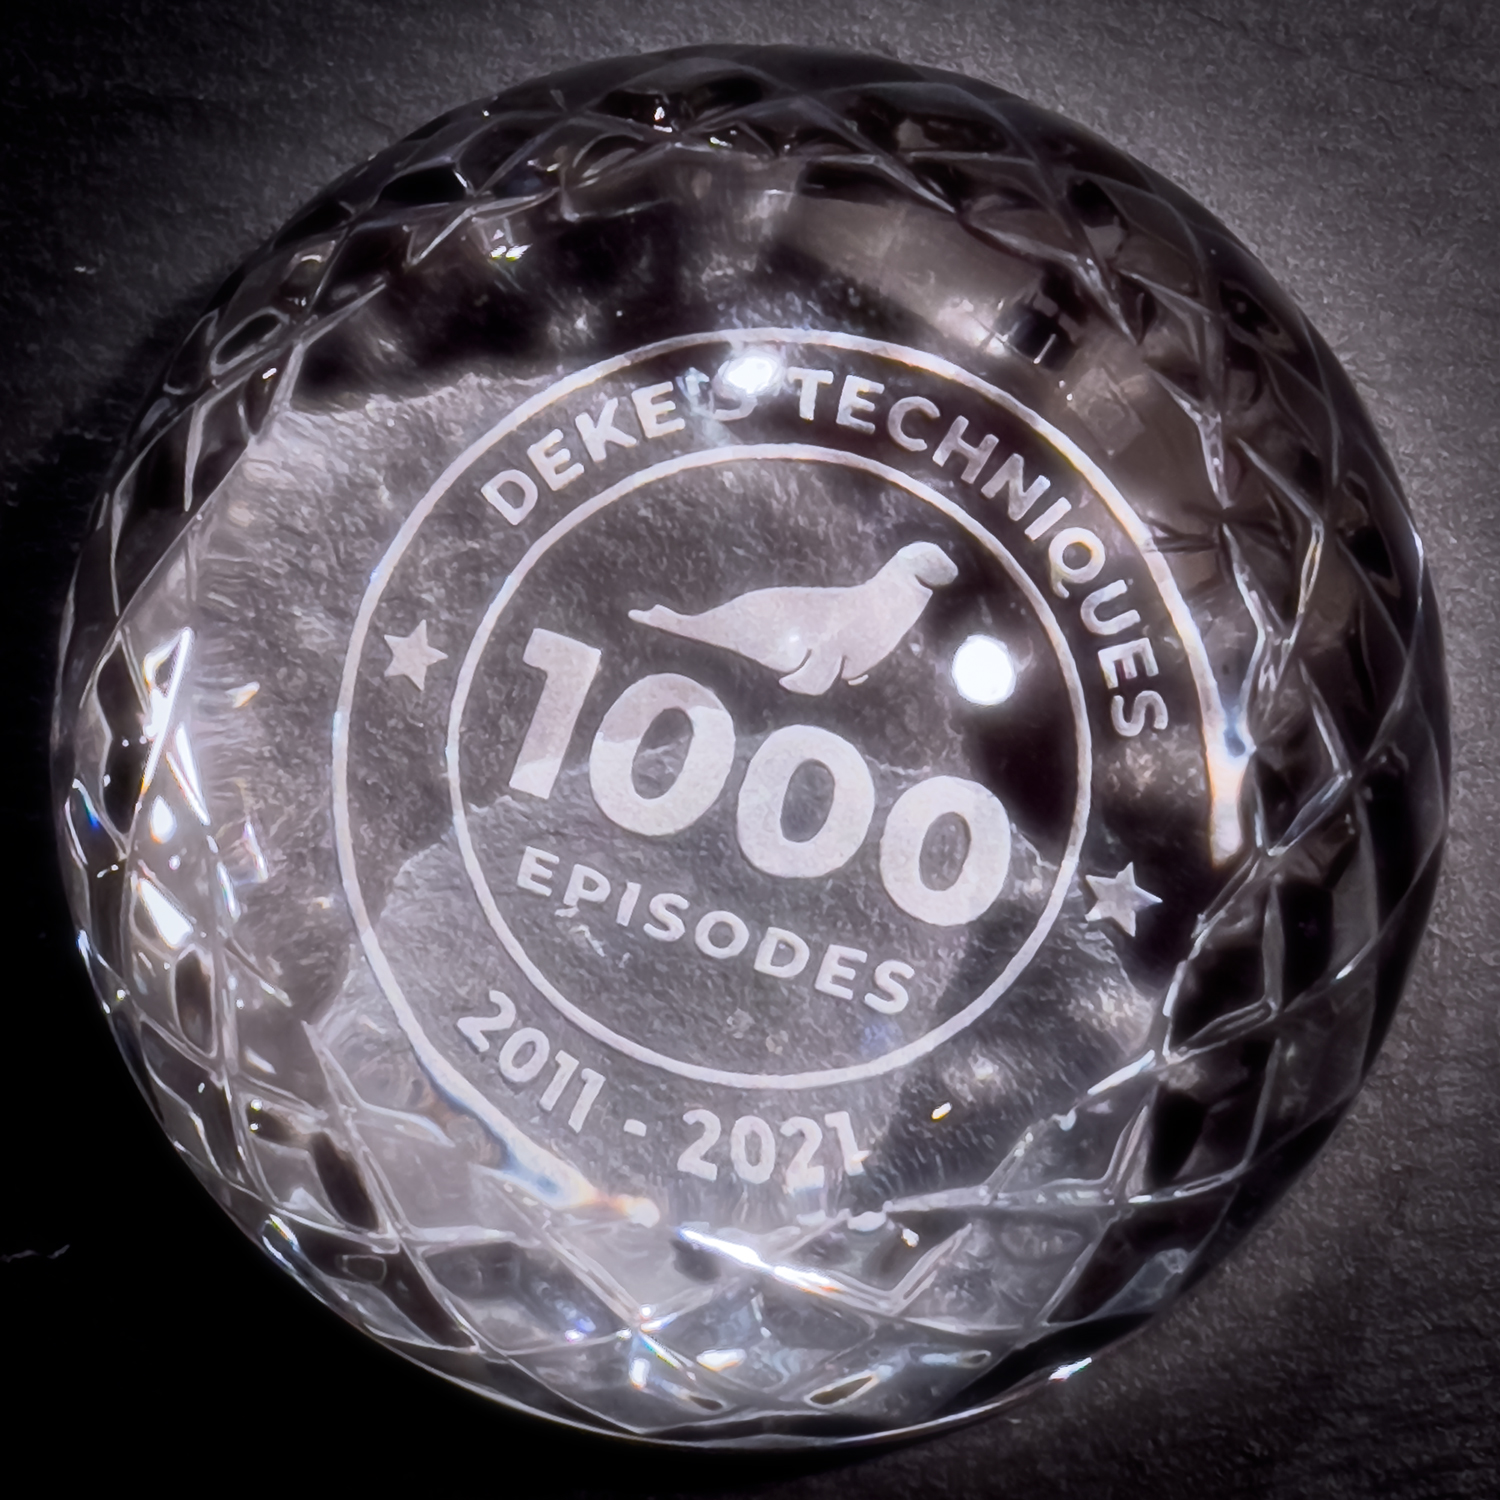 A beautiful 1000 pound 1000-year-old paperweight from my friends at LinkedIn Learning